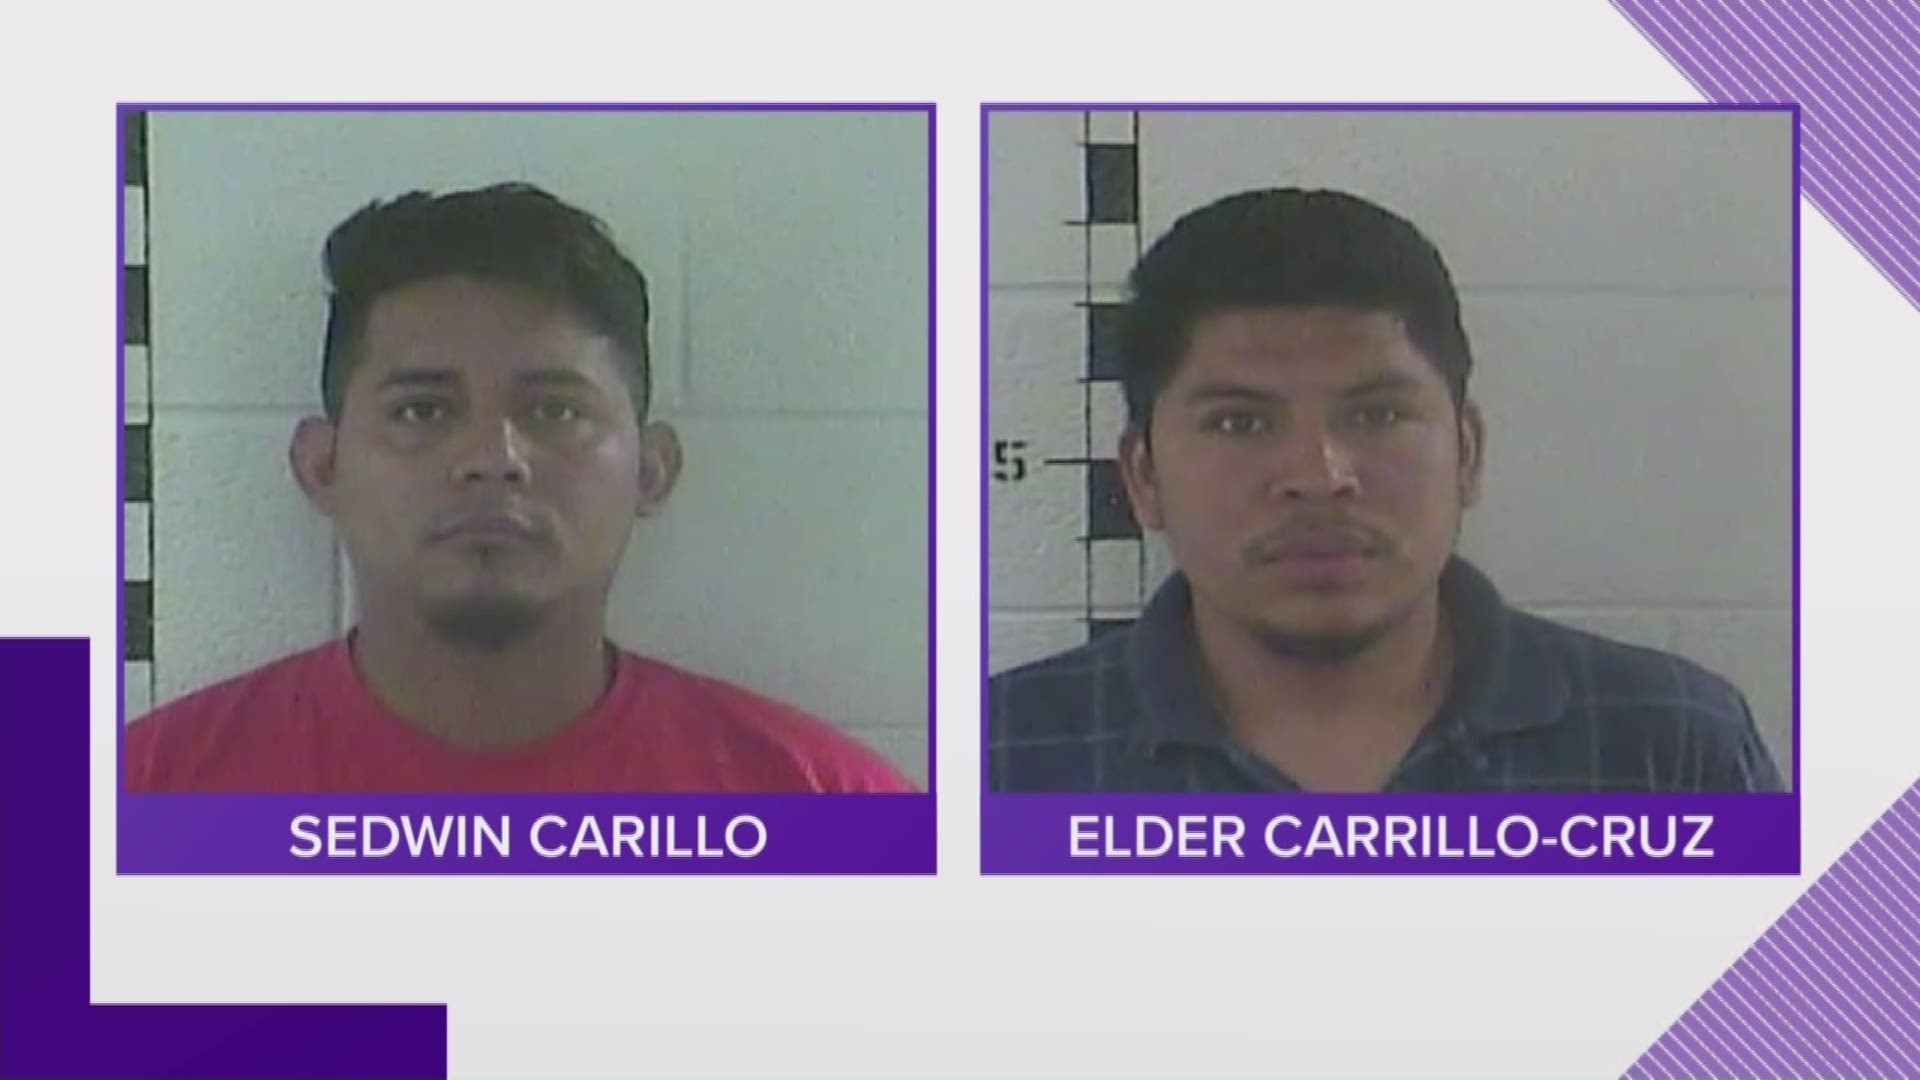 Kentucky State Police say Sedwin Carillo and Elder Carrillo-Cruz were arrested through an undercover investigation.